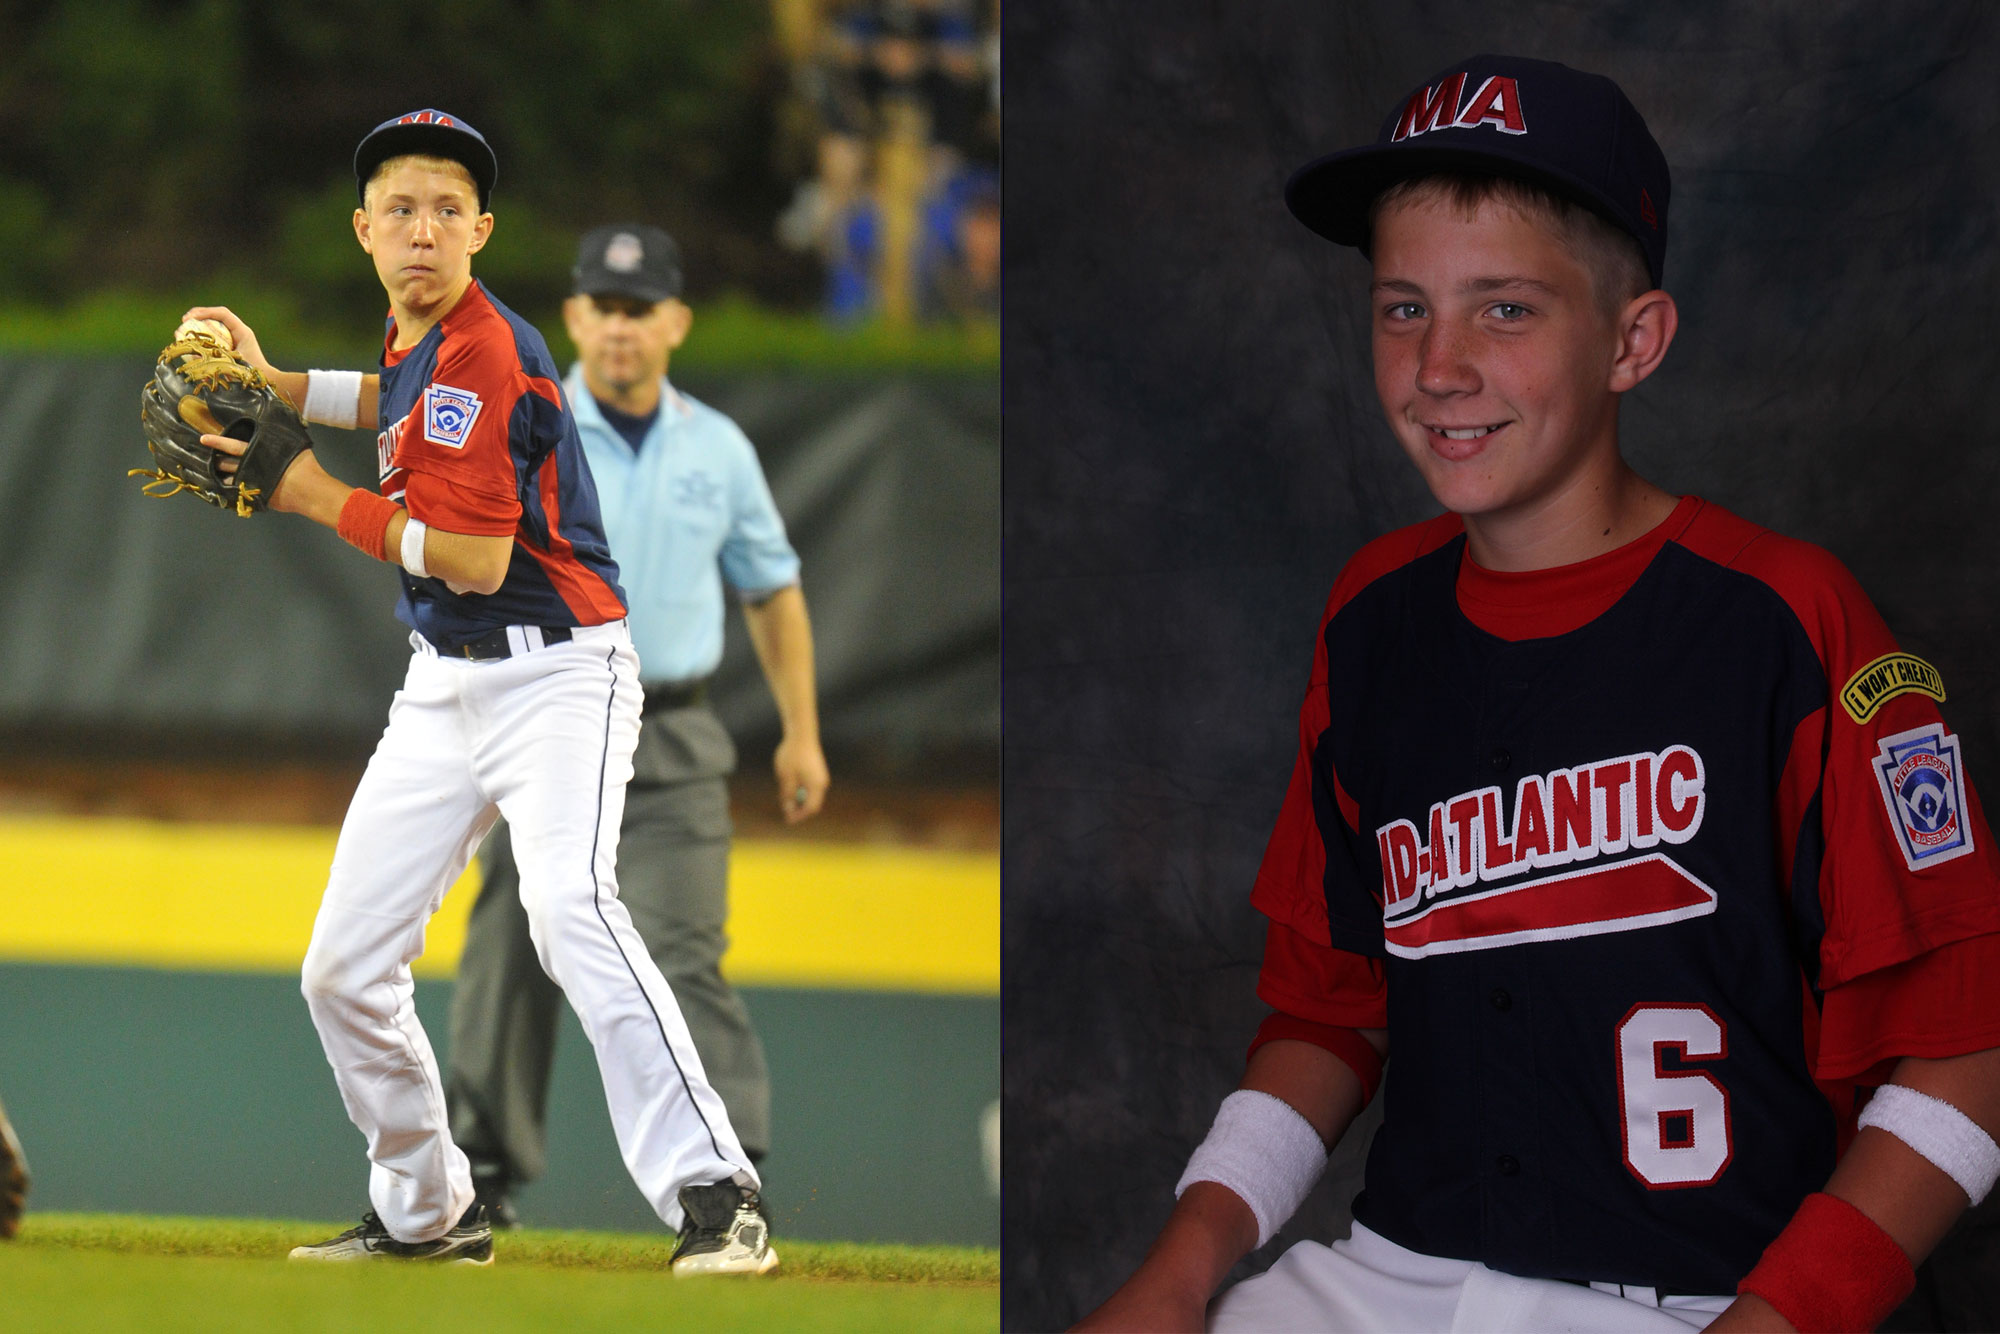 The Biggest Star at the Little League World Series Is Going to